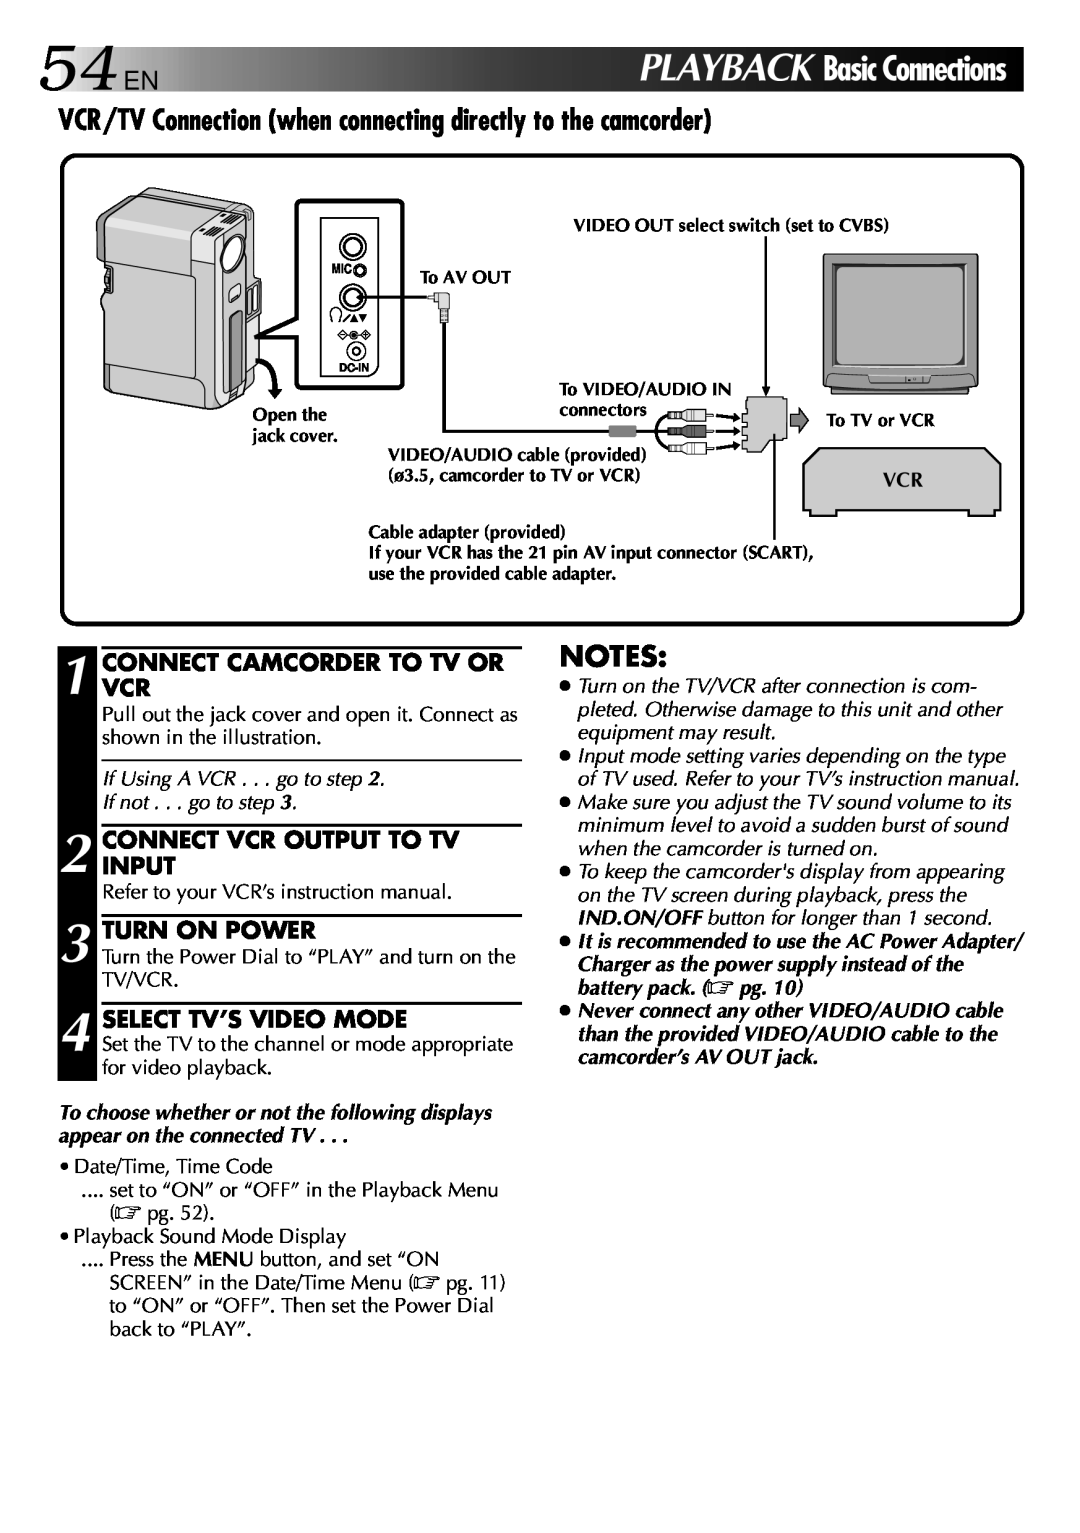 JVC GR-DVX 2LTD, LYT0002-0W3A 54EN PLAYBACK Basic Connections, VCR/TV Connection when connecting directly to the camcorder 